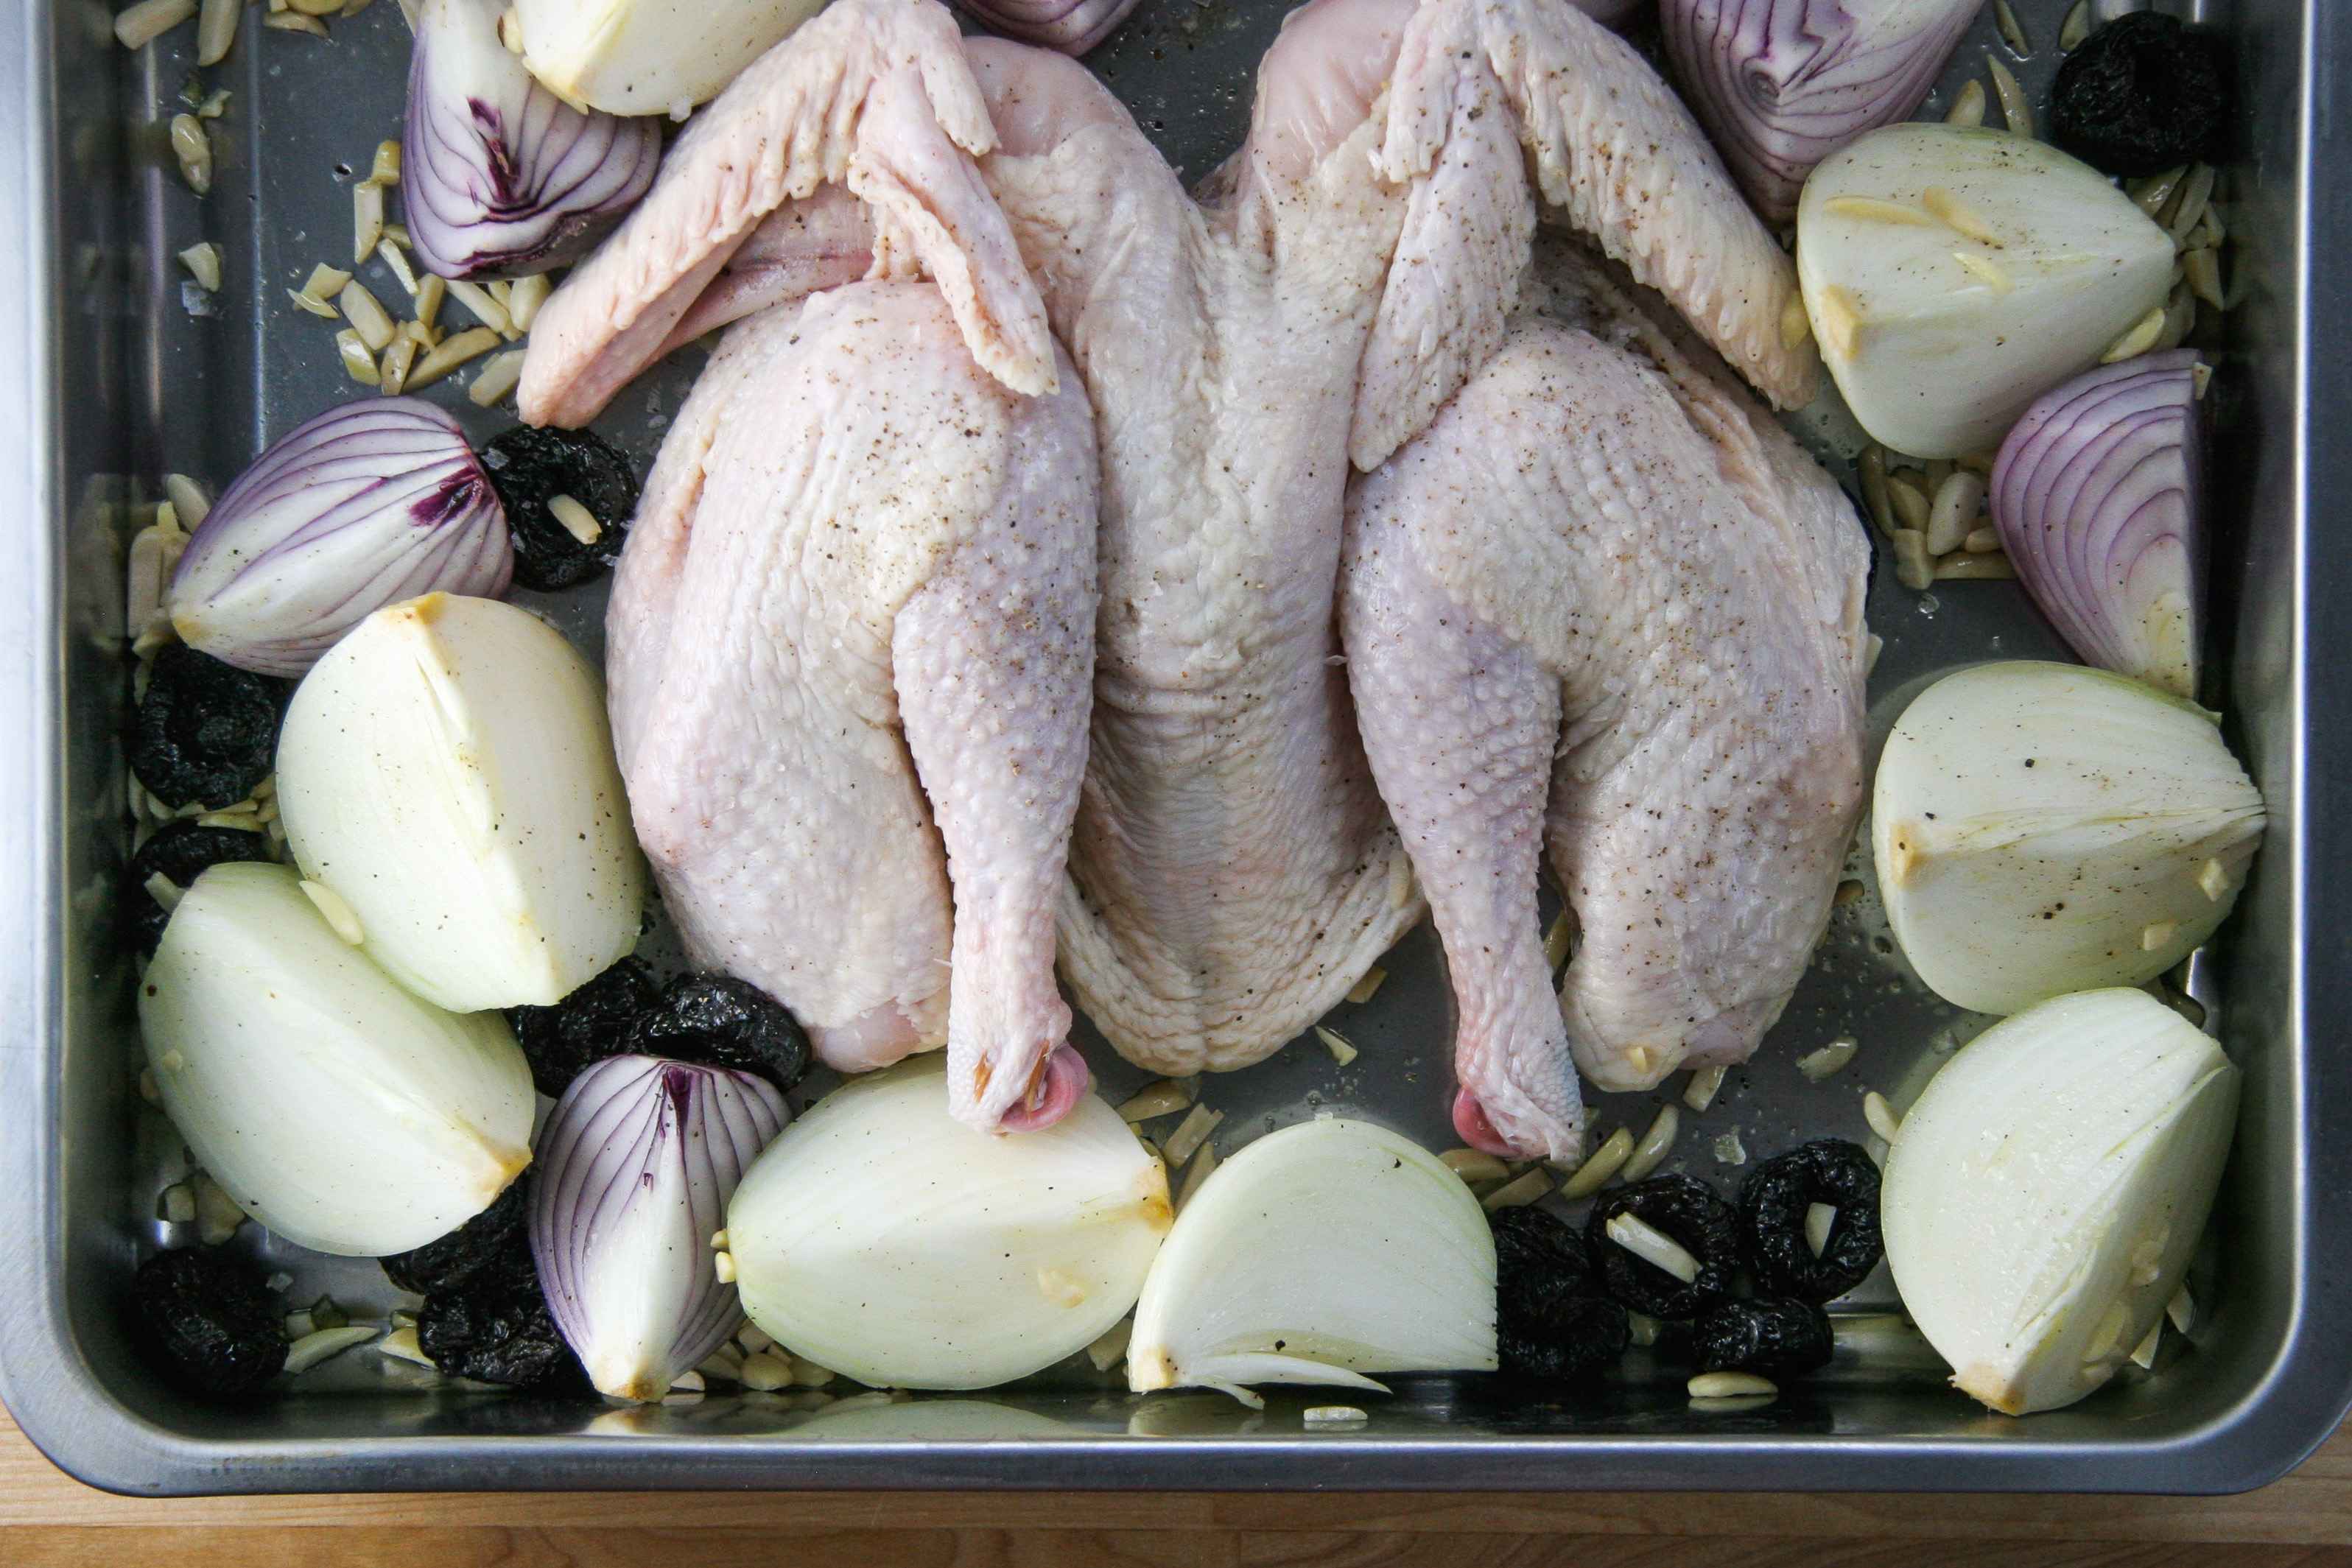 Prune & Almond Roast Chicken with Onions over Basmati Rice | I Will Not Eat Oysters